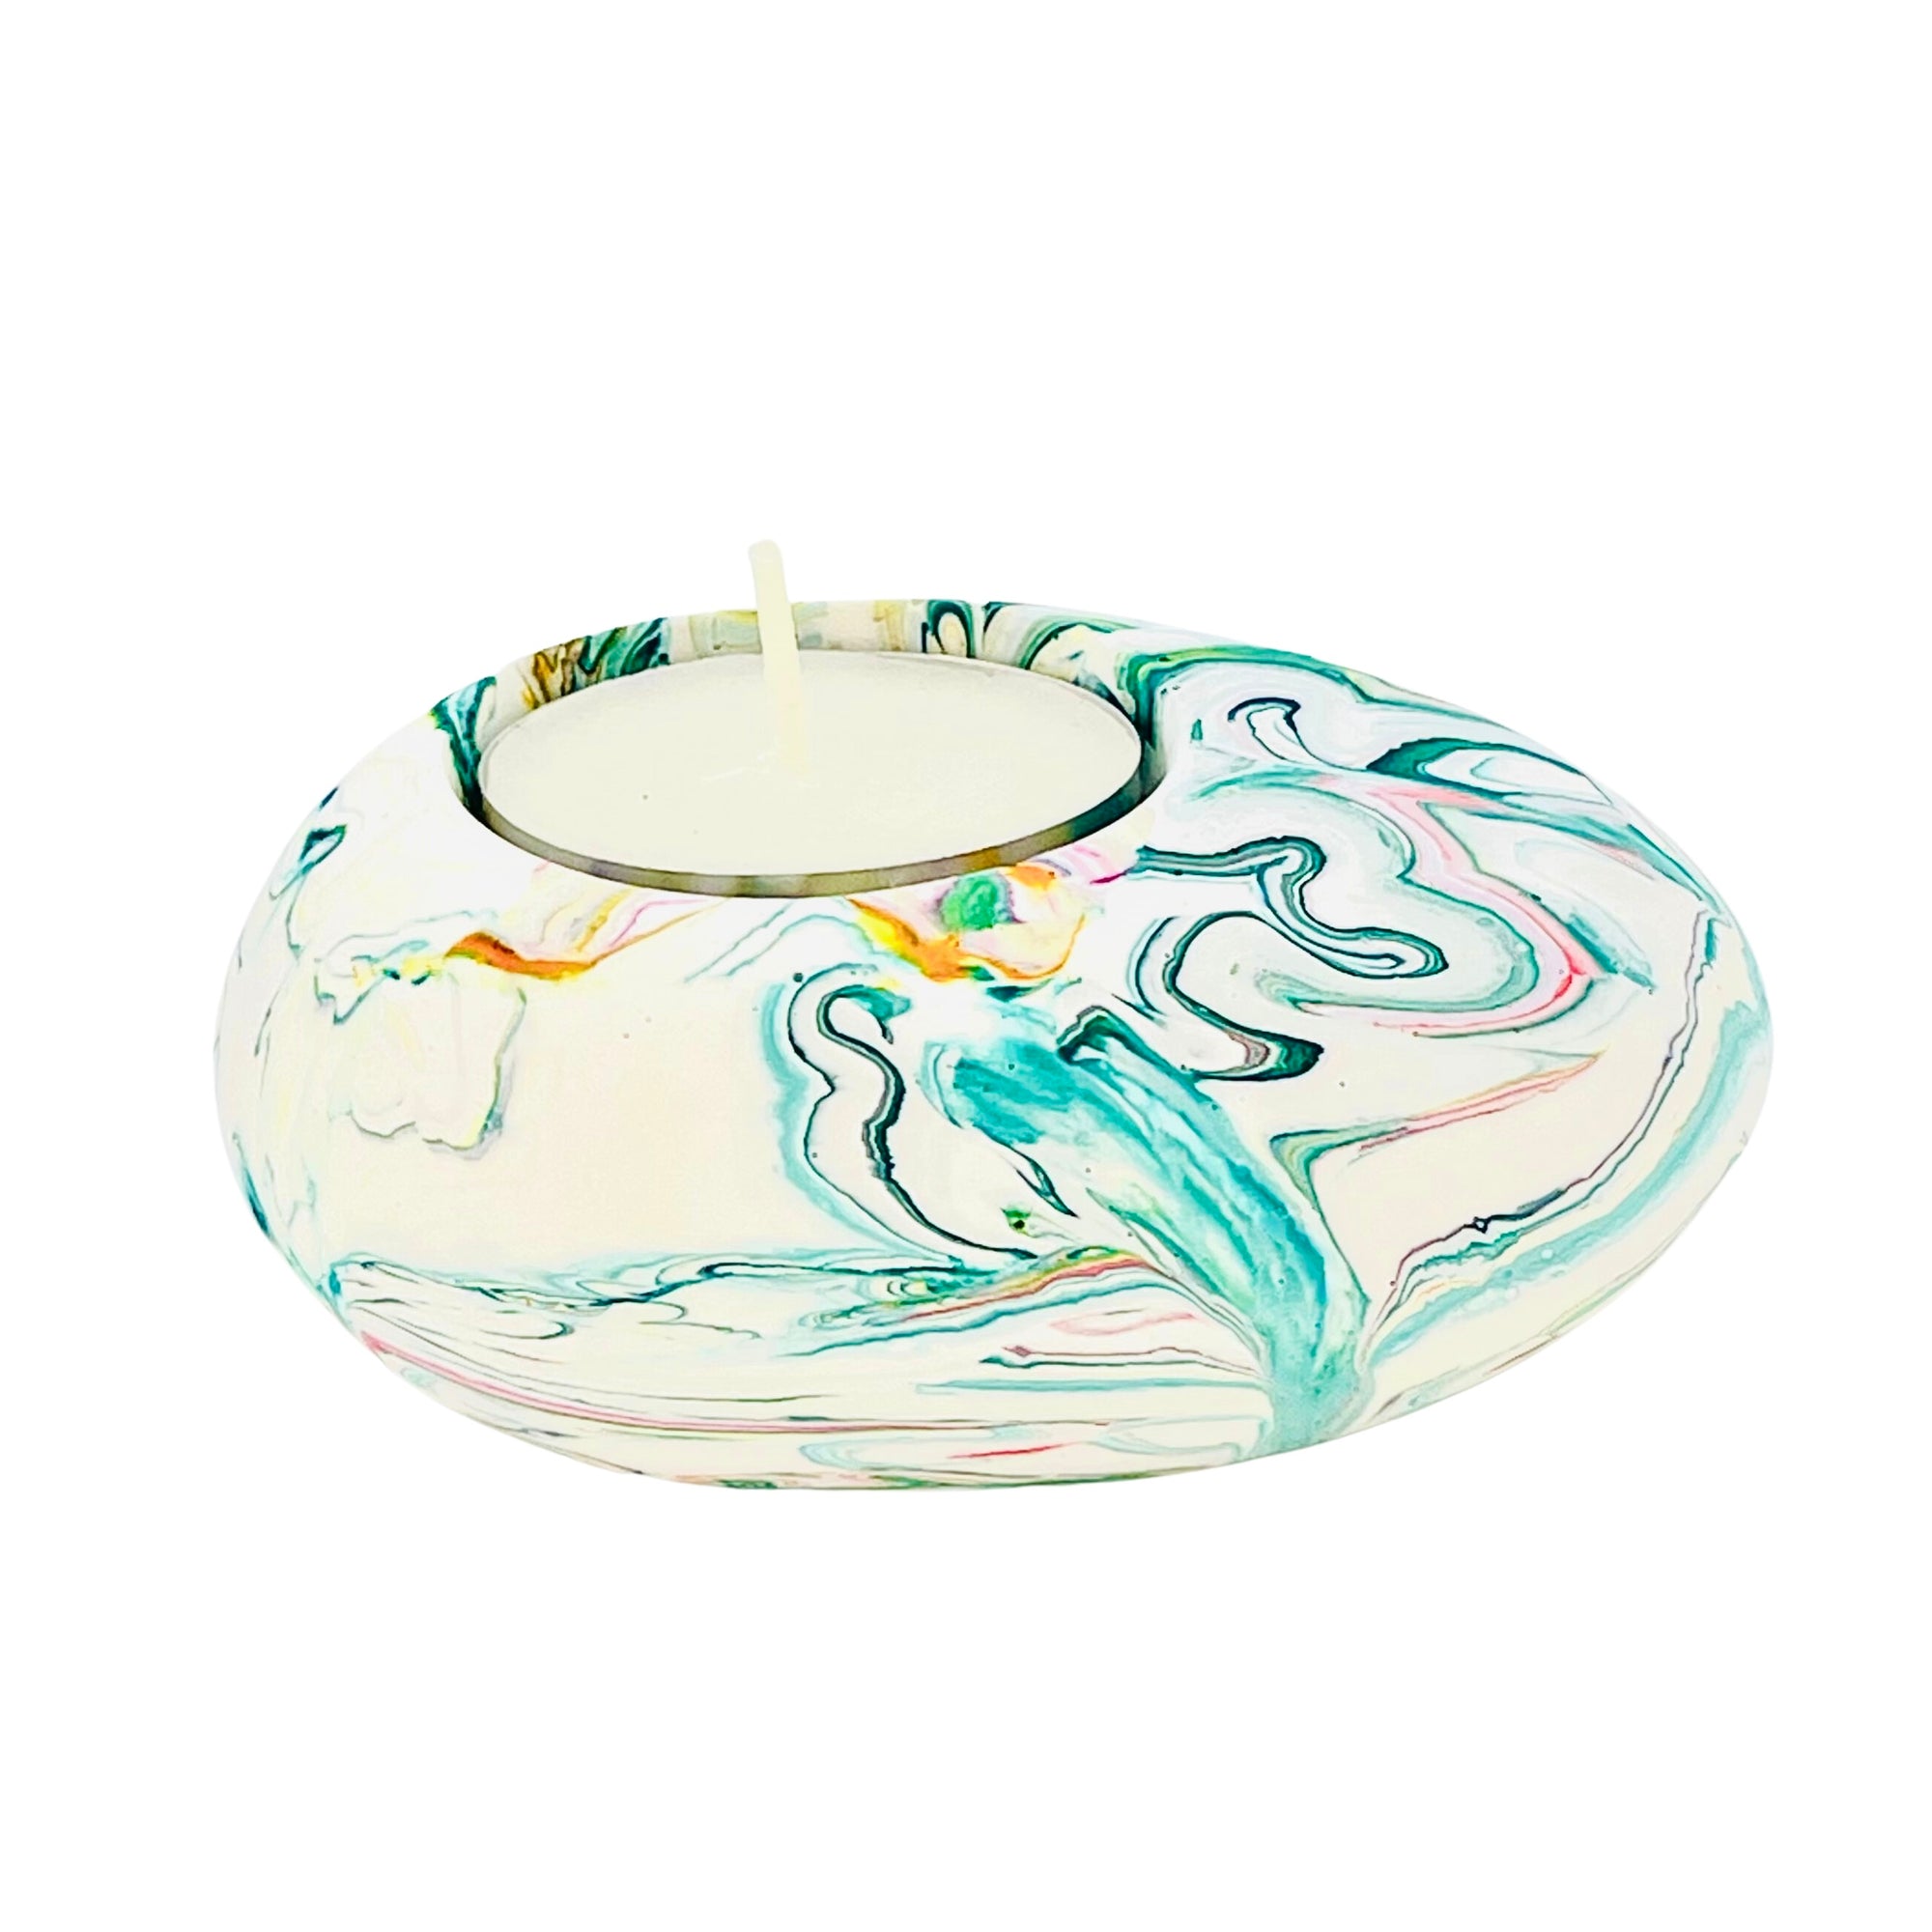 A Jesmonite tealight holder shaped like a pebble measuring 9cm in length and marbled with teal pigment.